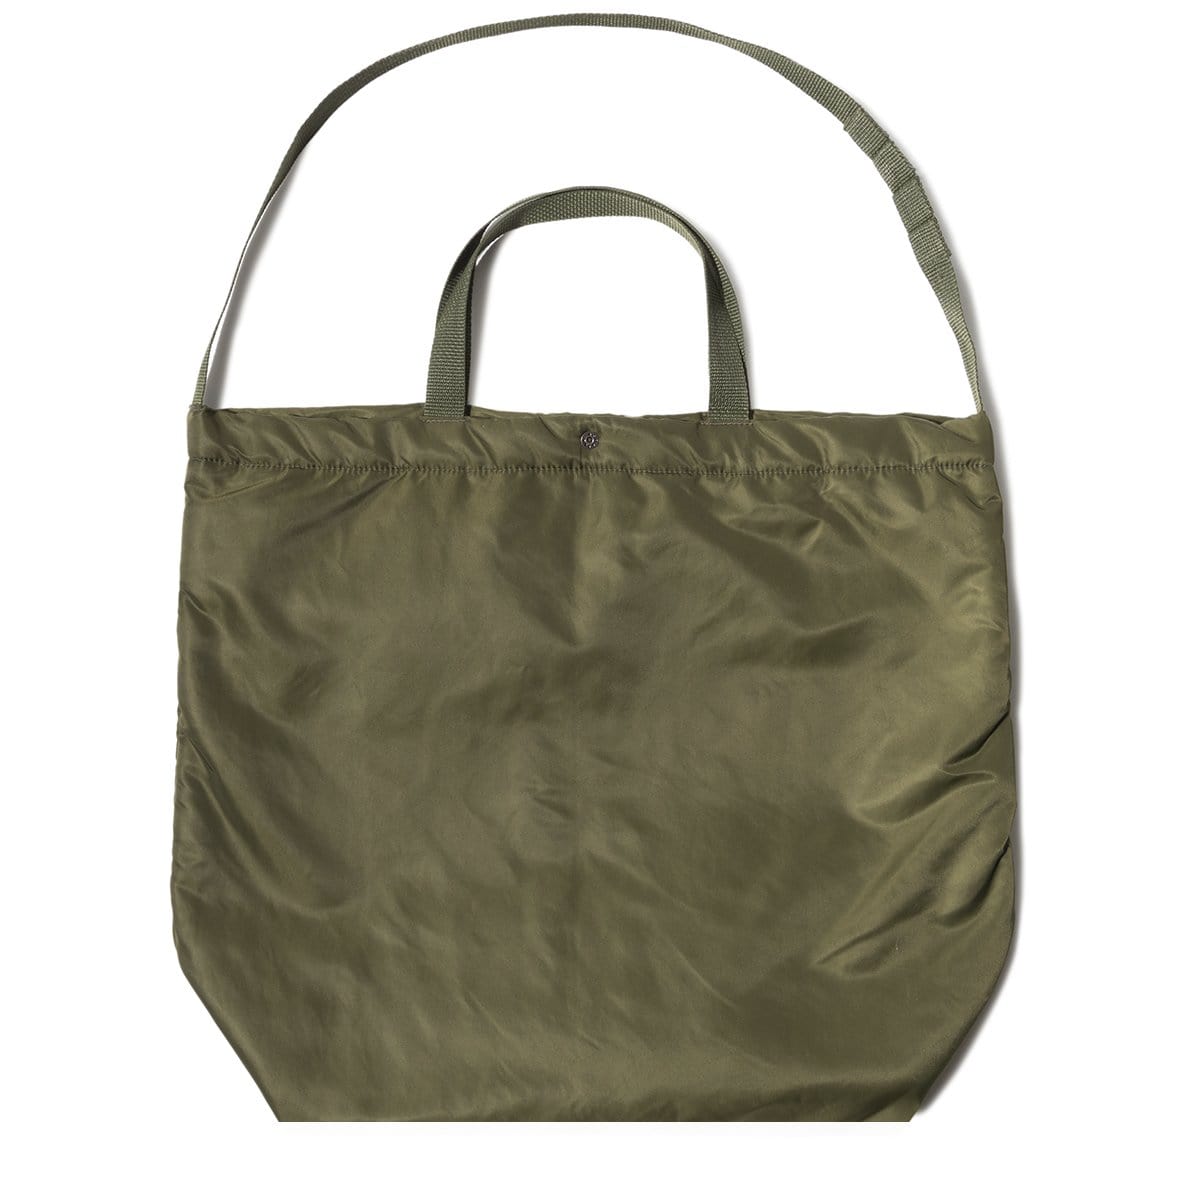 Engineered Garments Bags & Accessories OLIVE FLIGHT SATIN NYLON / OS CARRY ALL TOTE